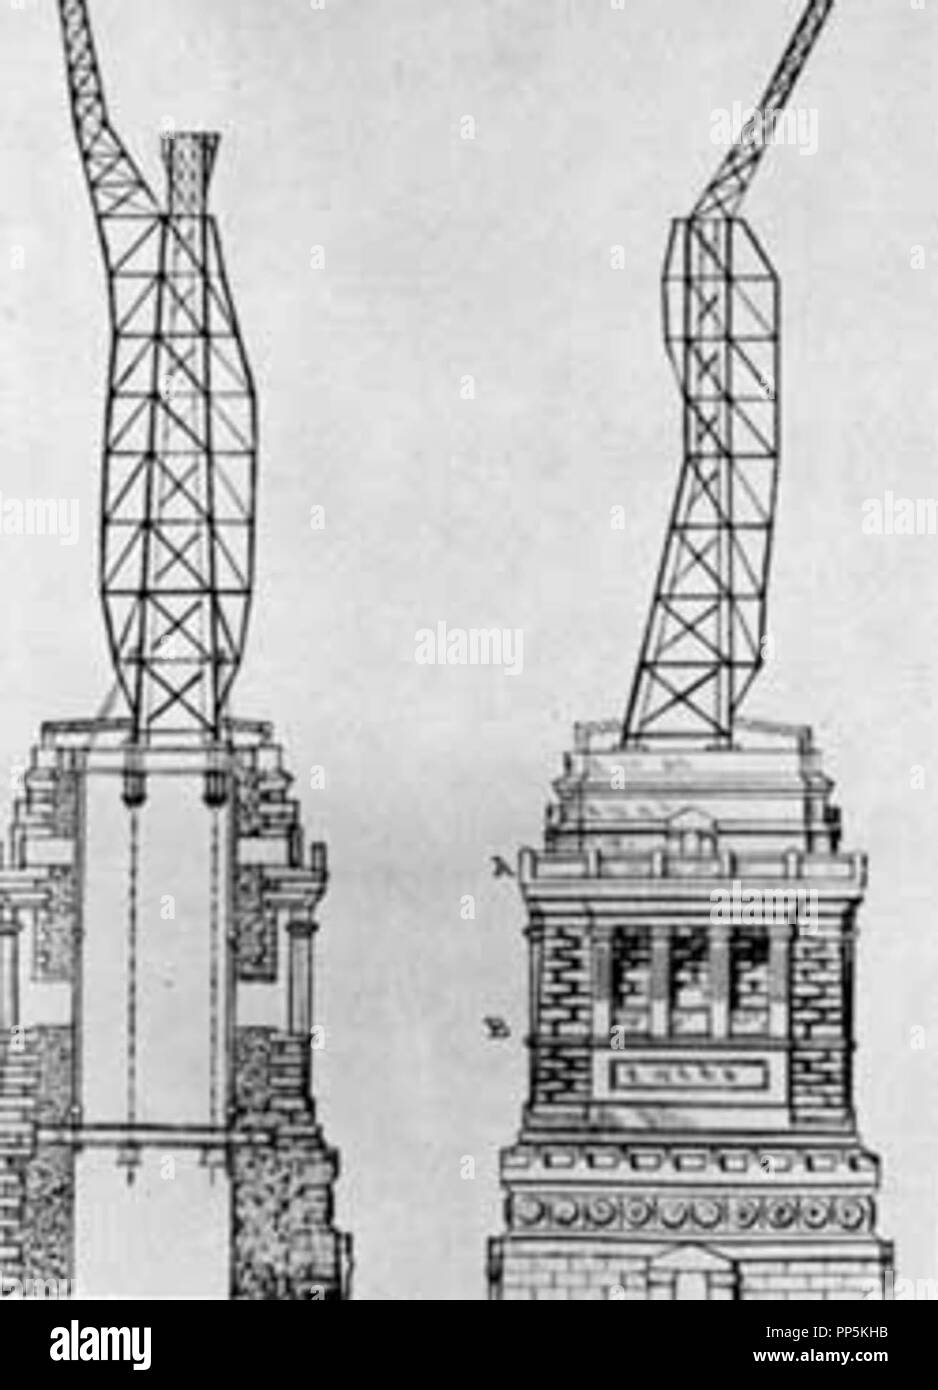 Interior Structural Elements Of The Statue Of Liberty